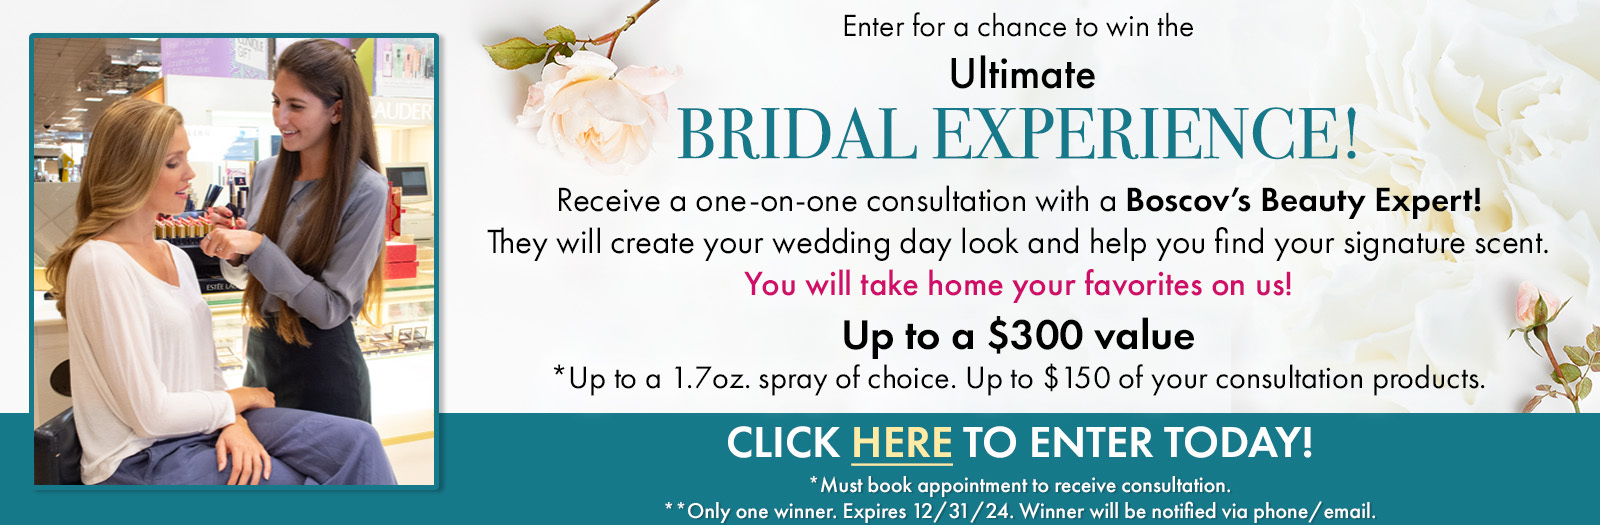 Win a Free Bridal Experience